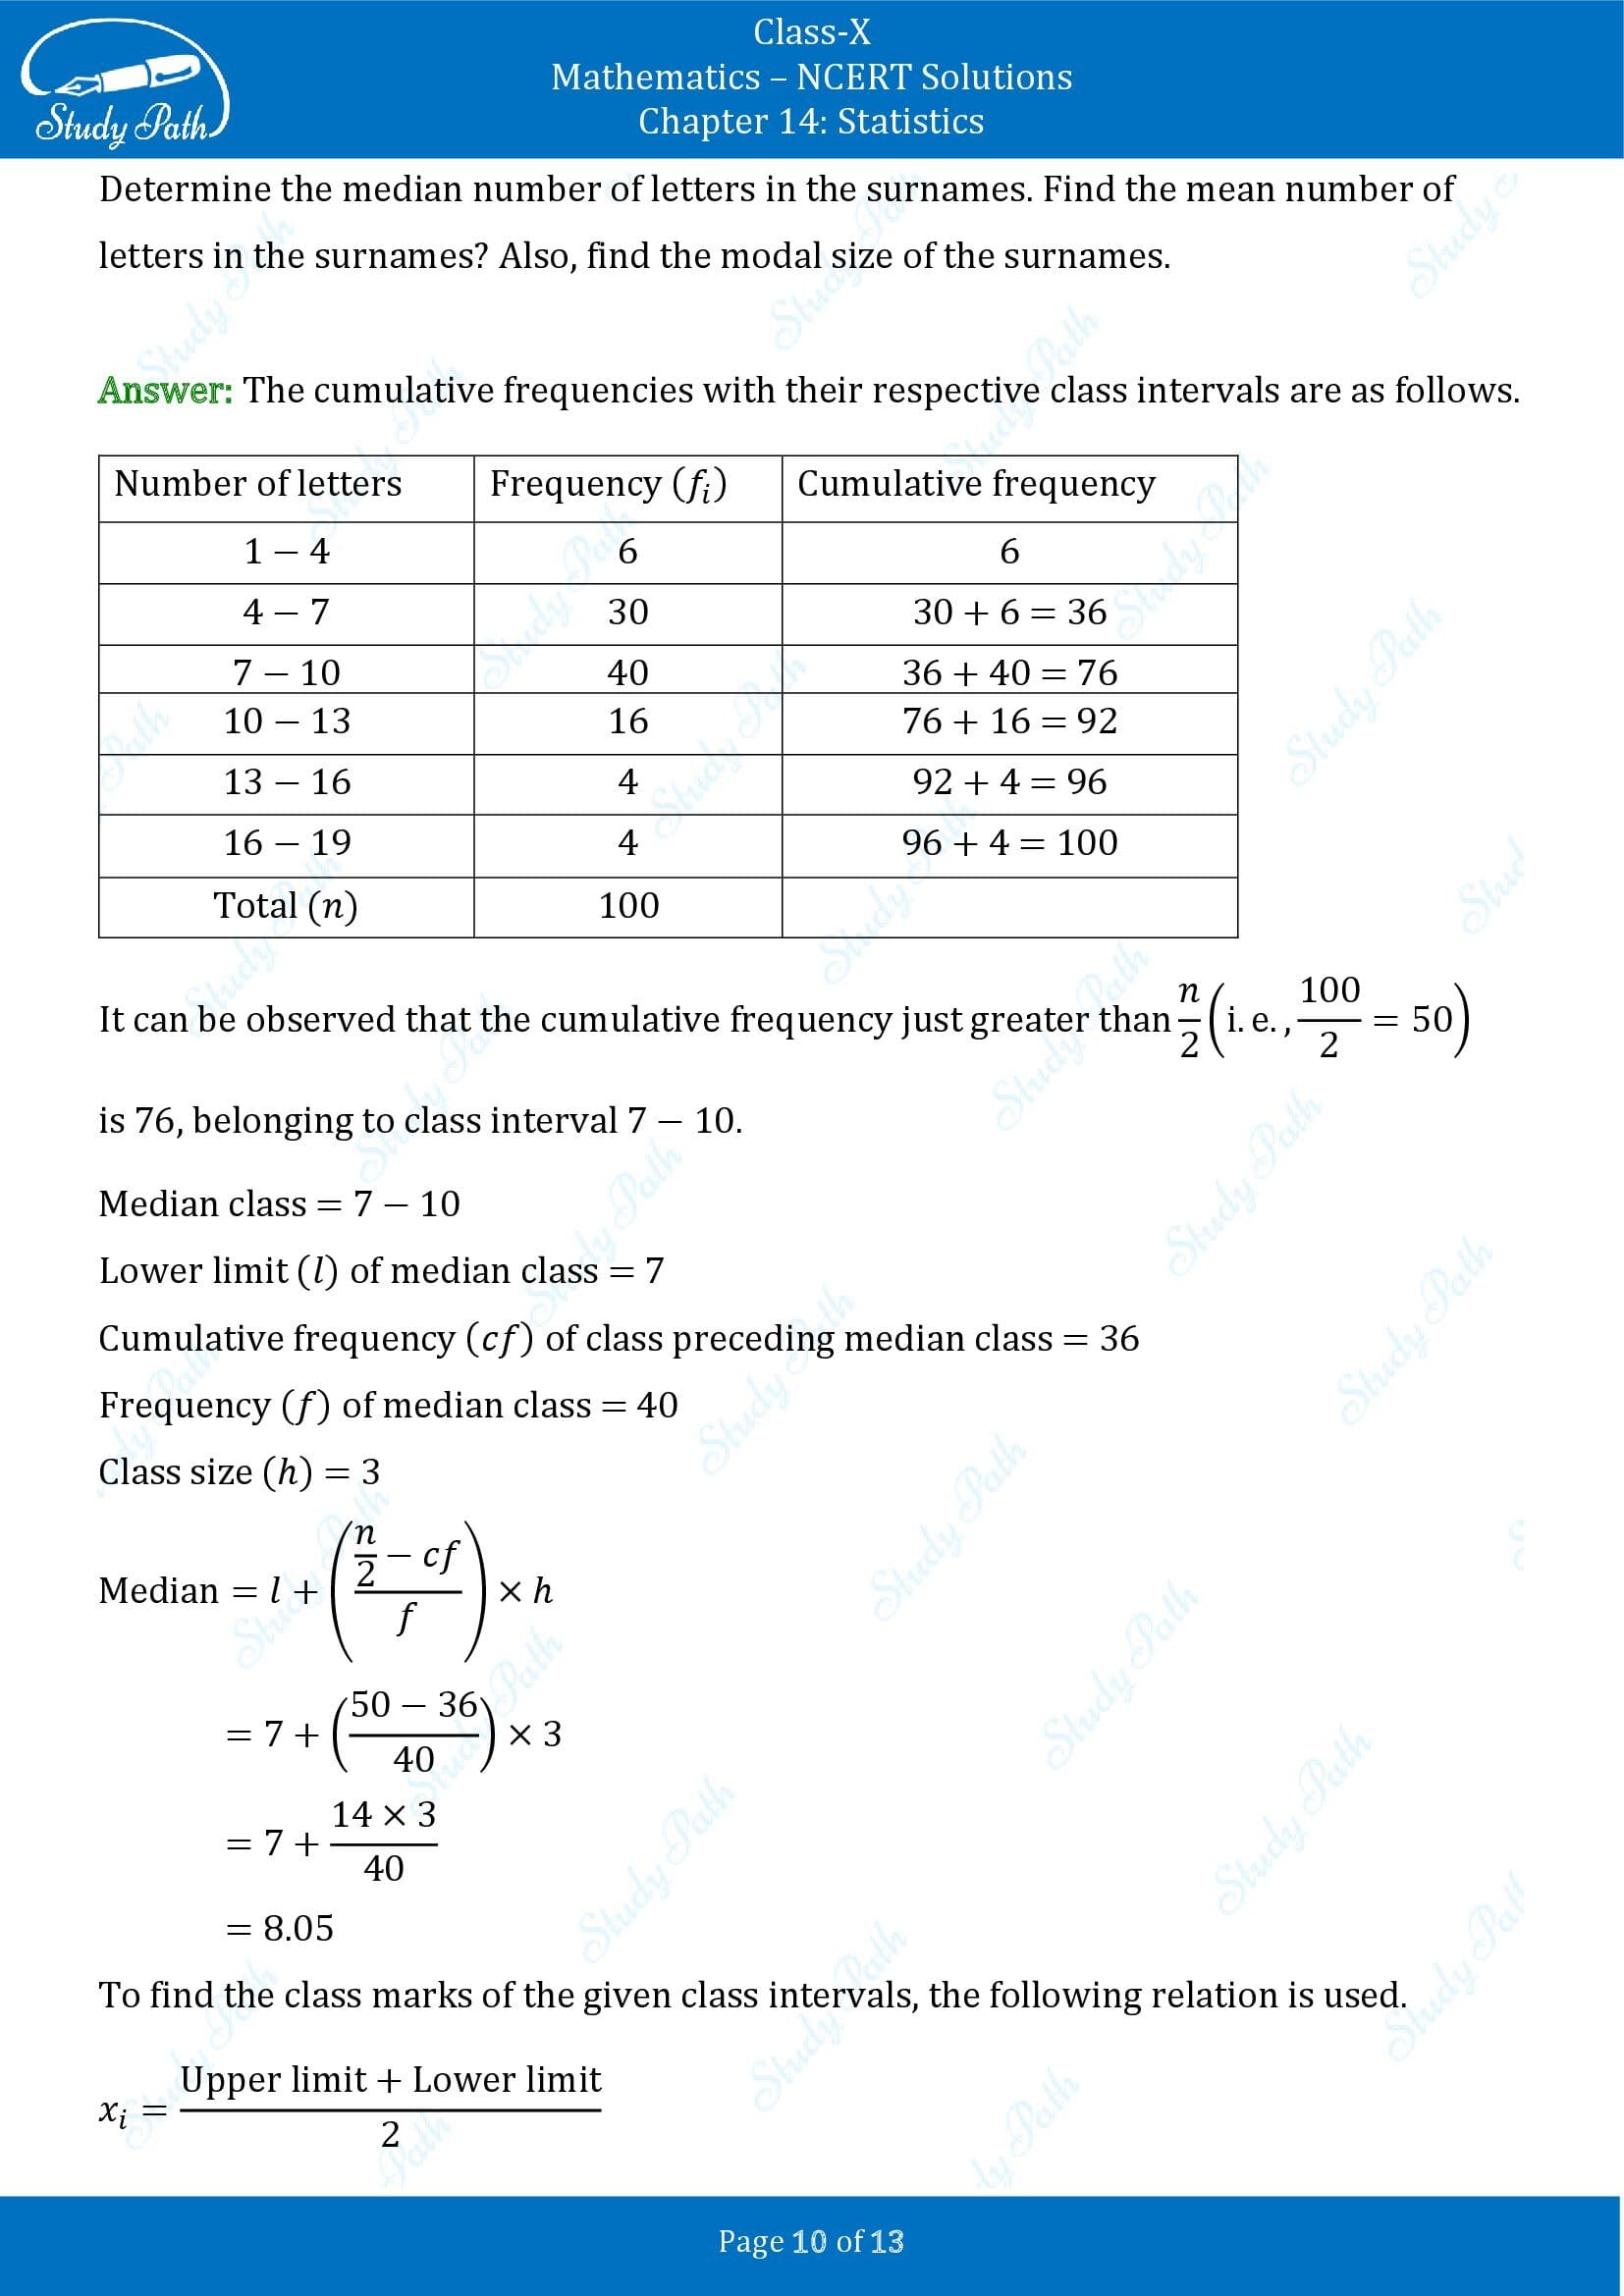 NCERT Solutions for Class 10 Maths Chapter 14 Statistics Exercise 14.3 00010